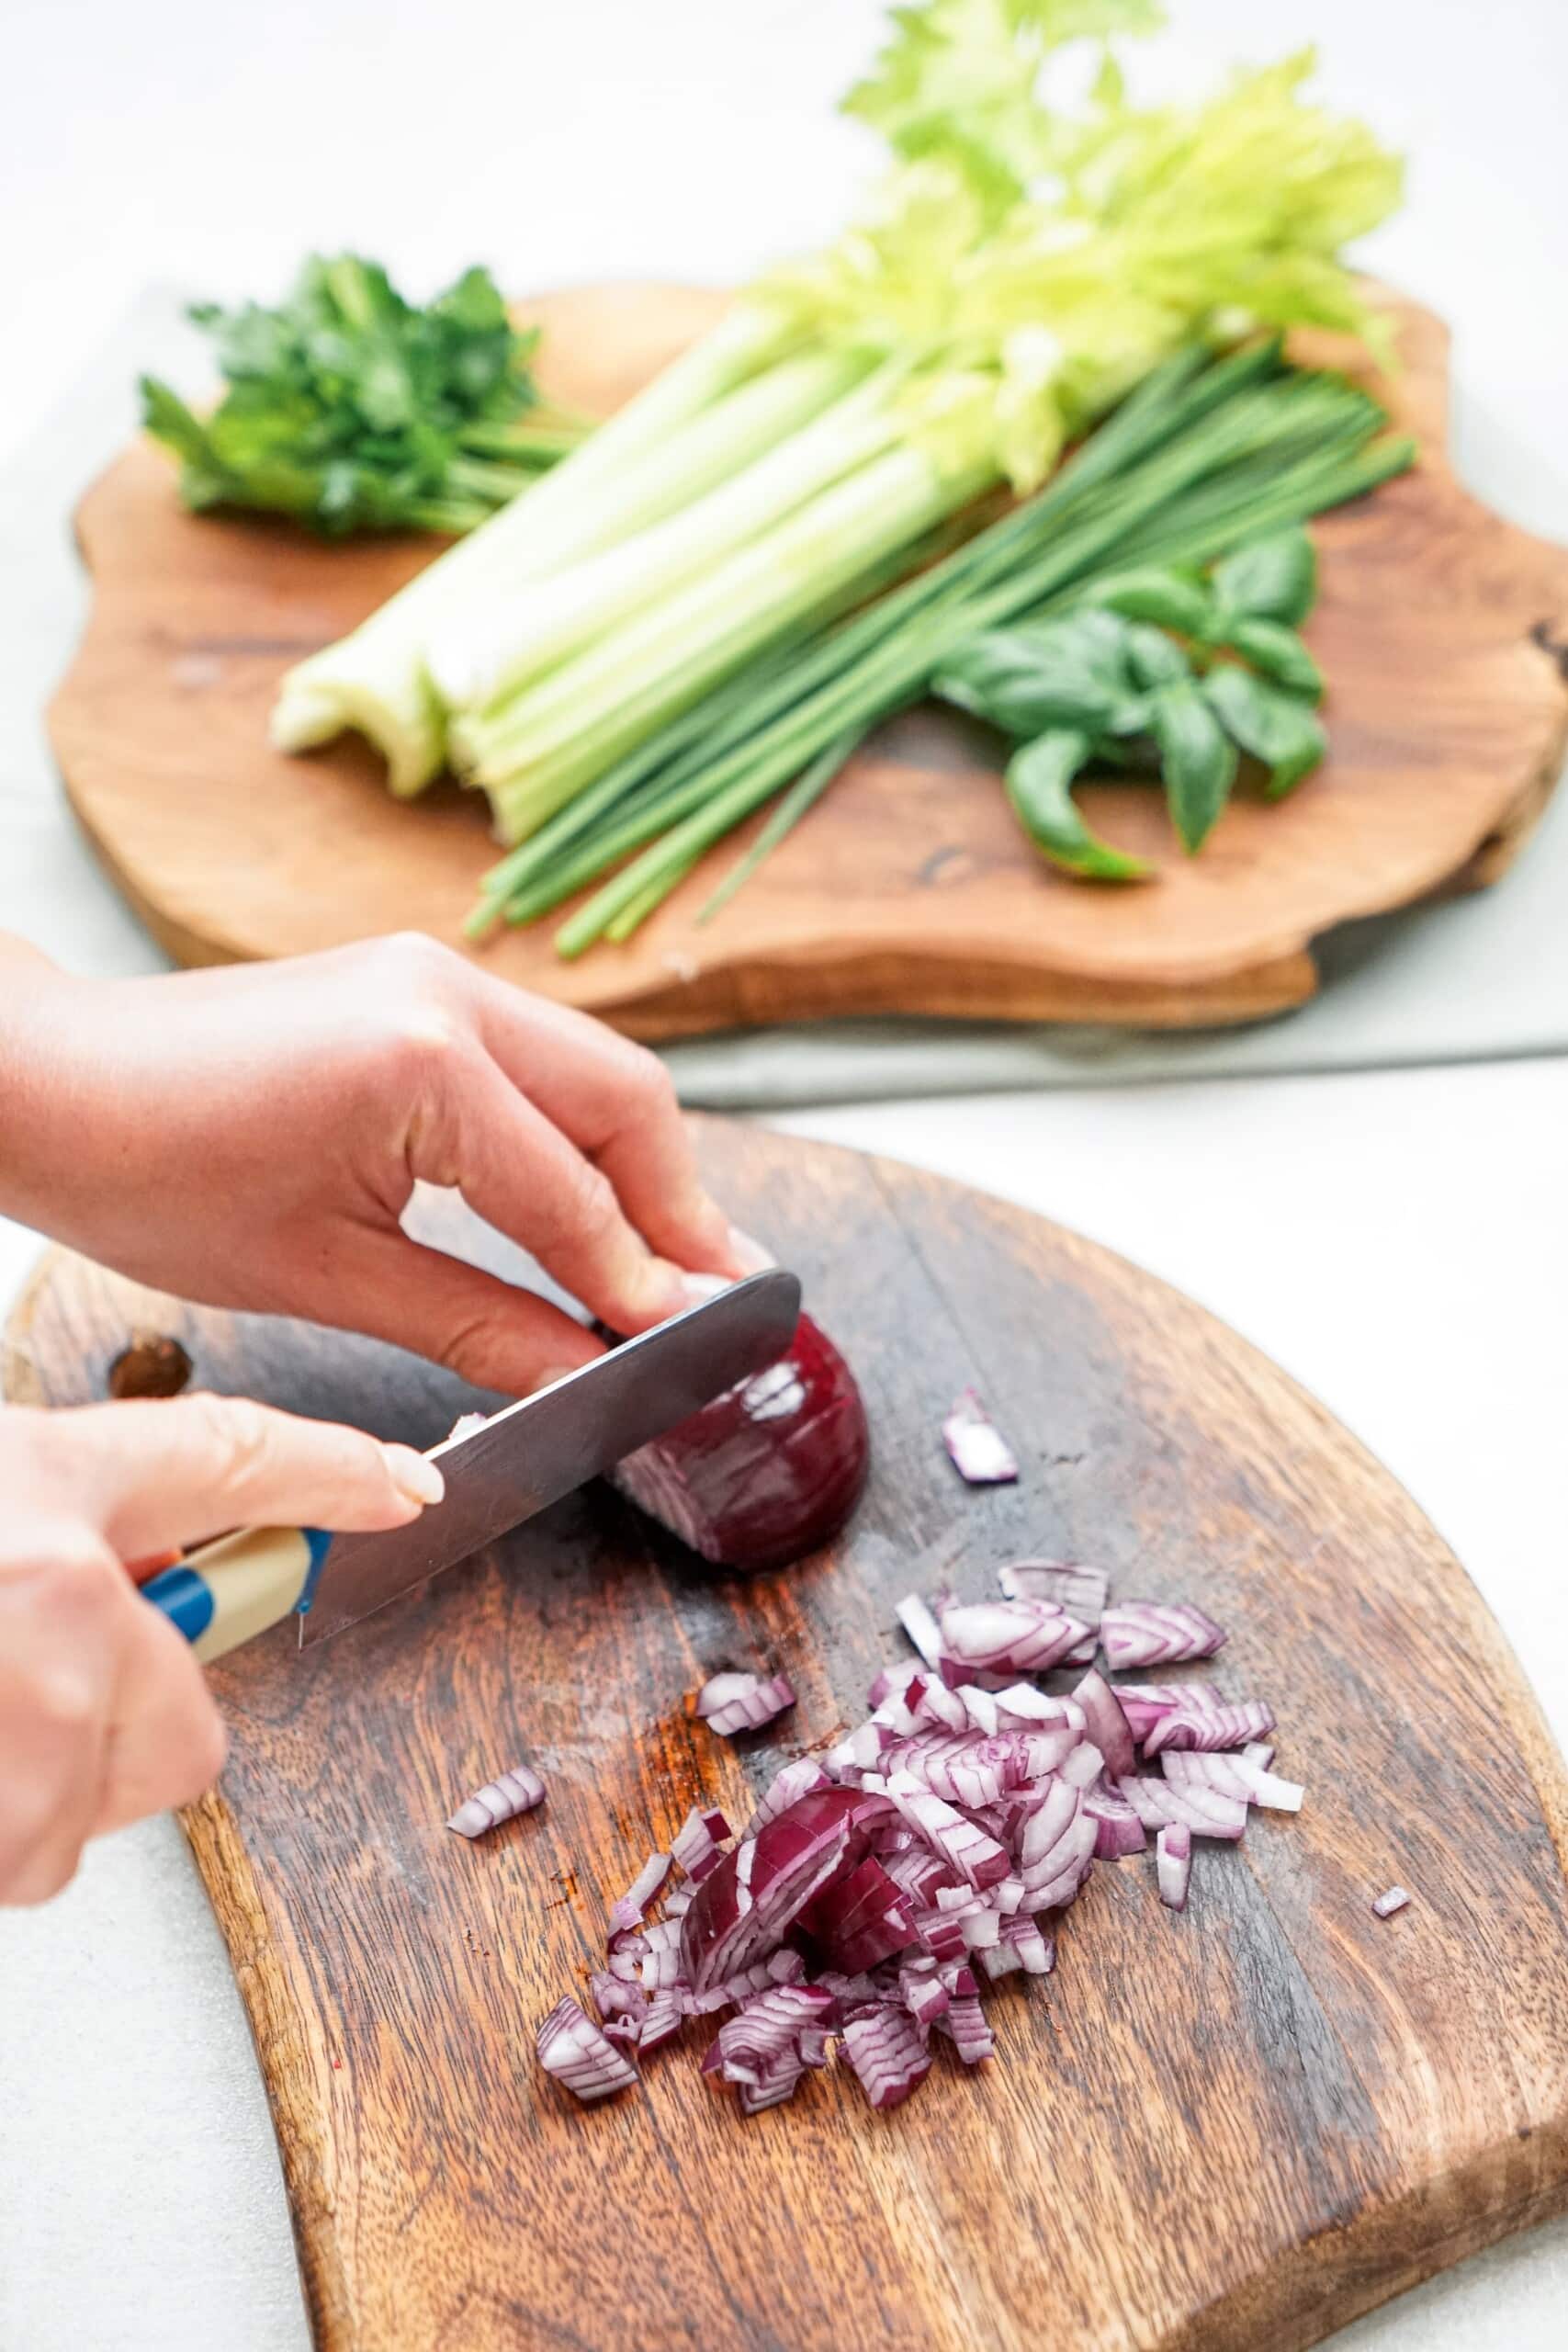 A woman's hands are chopping red onions on a cutting board